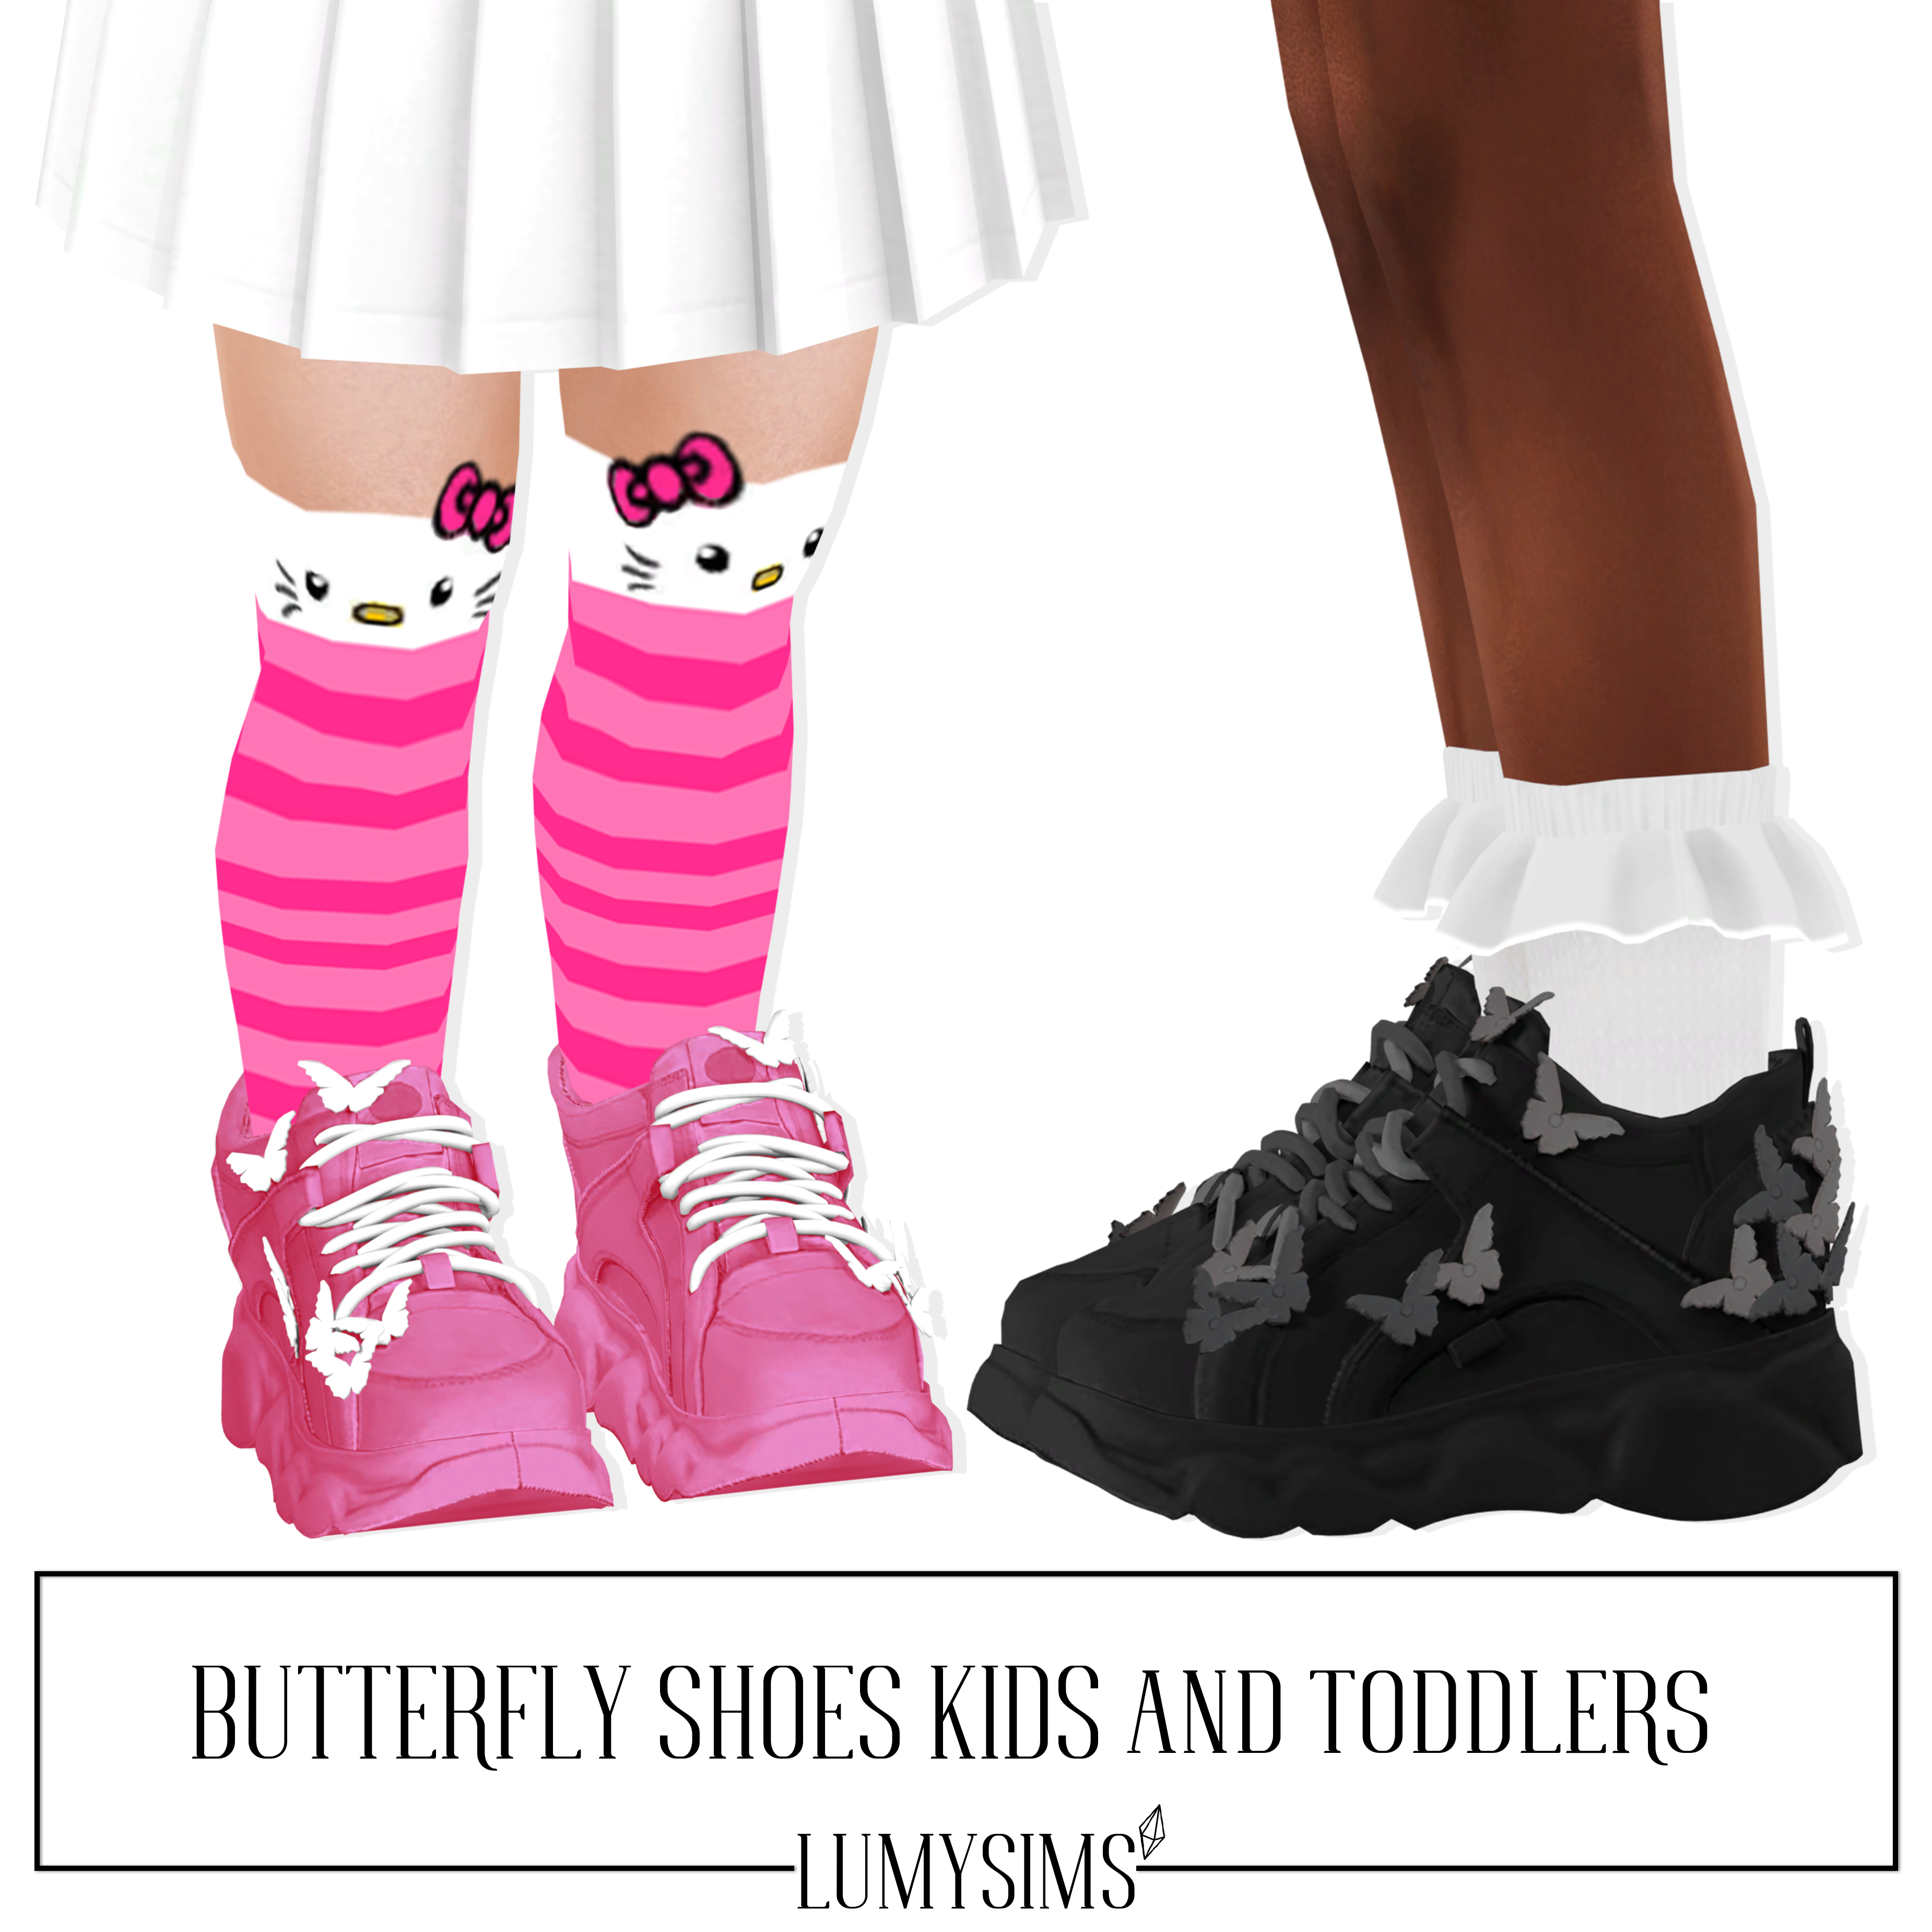 lumy’s BUTTERFLY SHOES KIDS AND TODDLERS